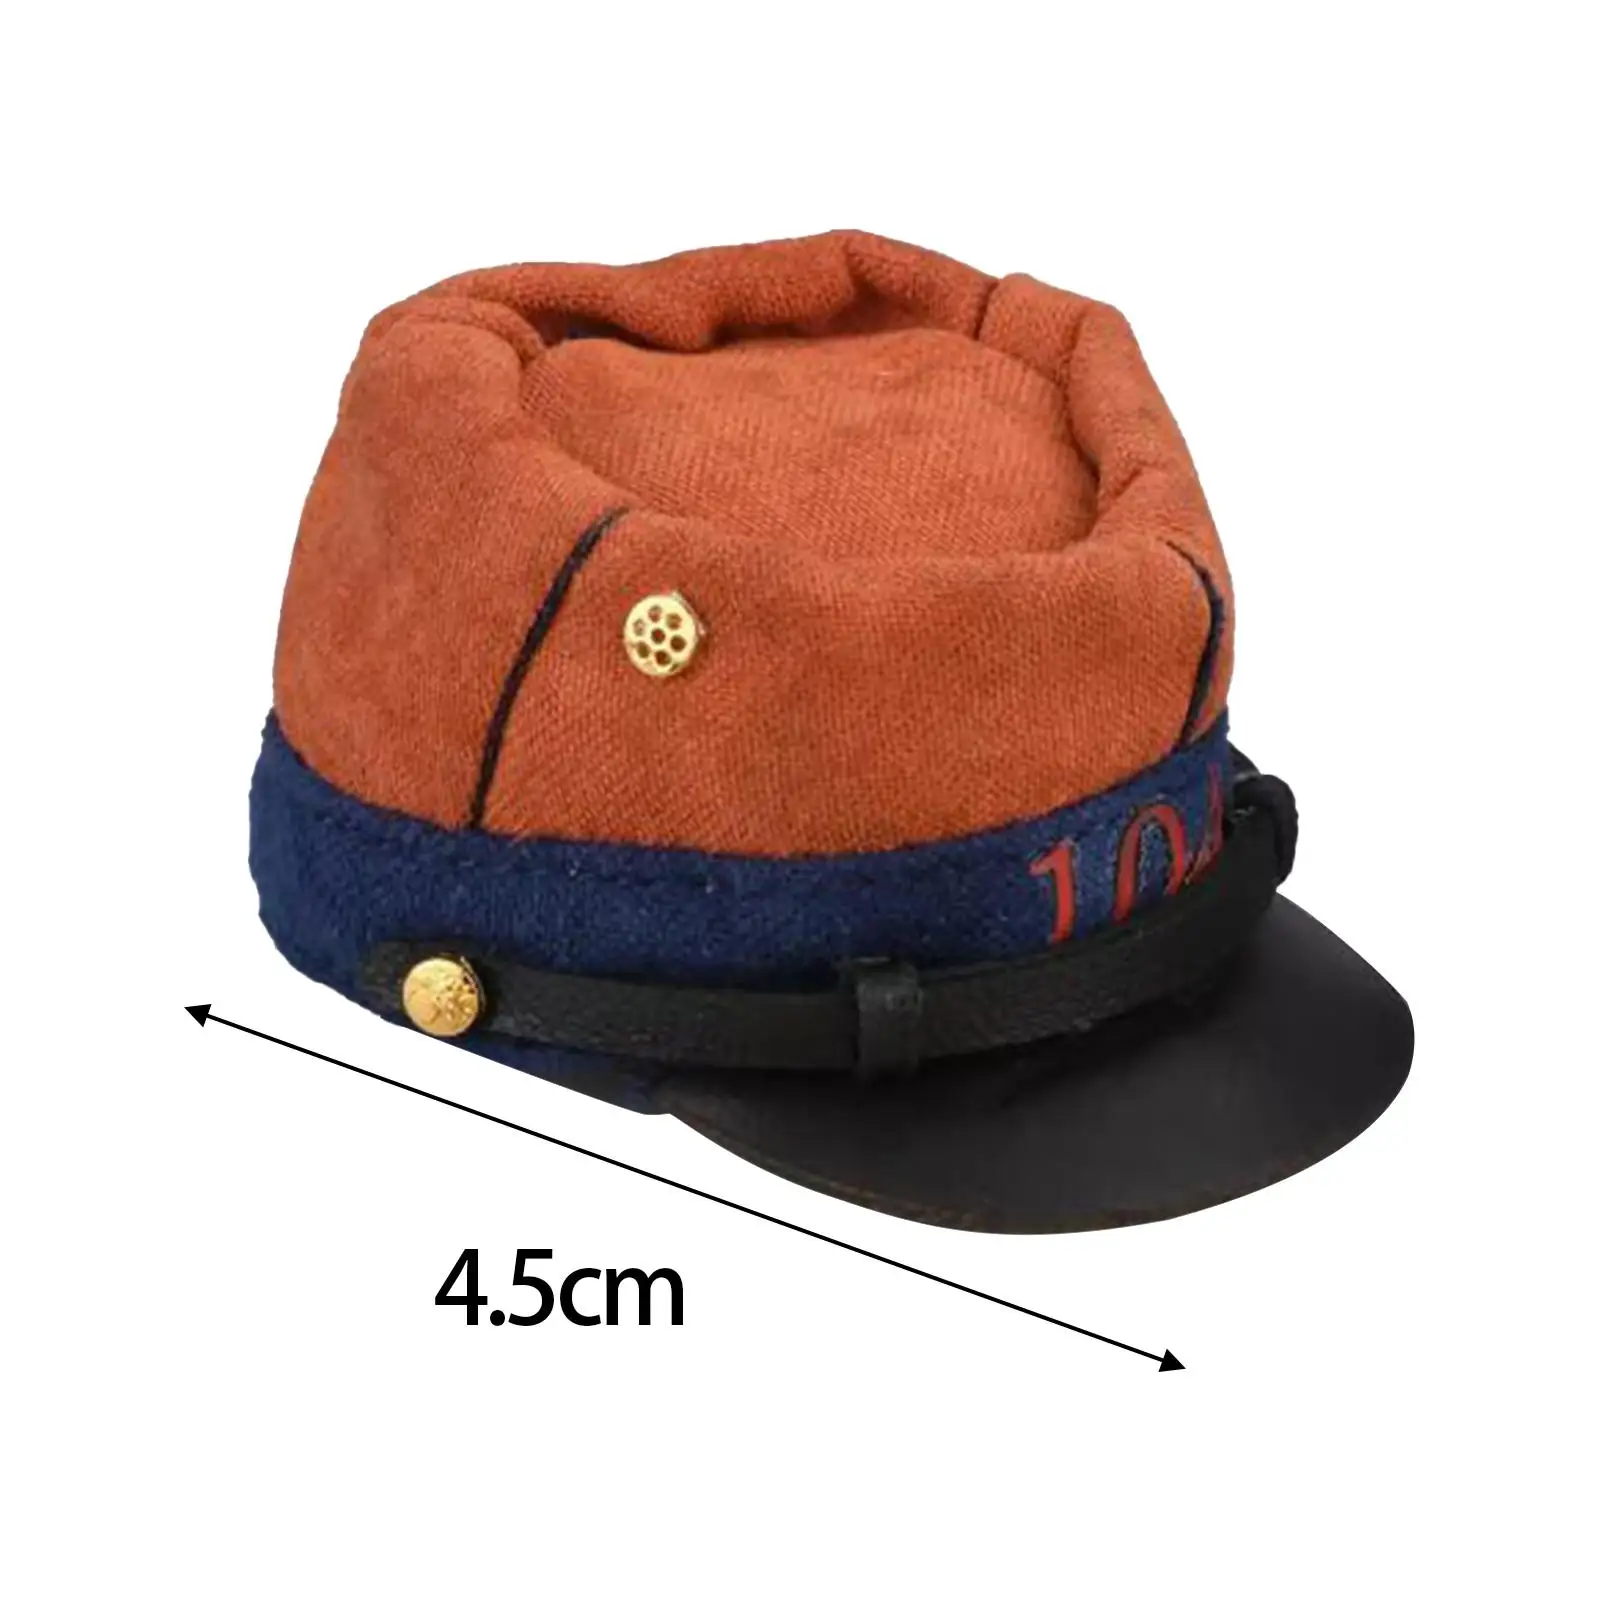 1/6 Model France Solider Hat Male Figure Cap Costume Accessories Outfit Stylish Decoration Accessory for 12inch Male Figures